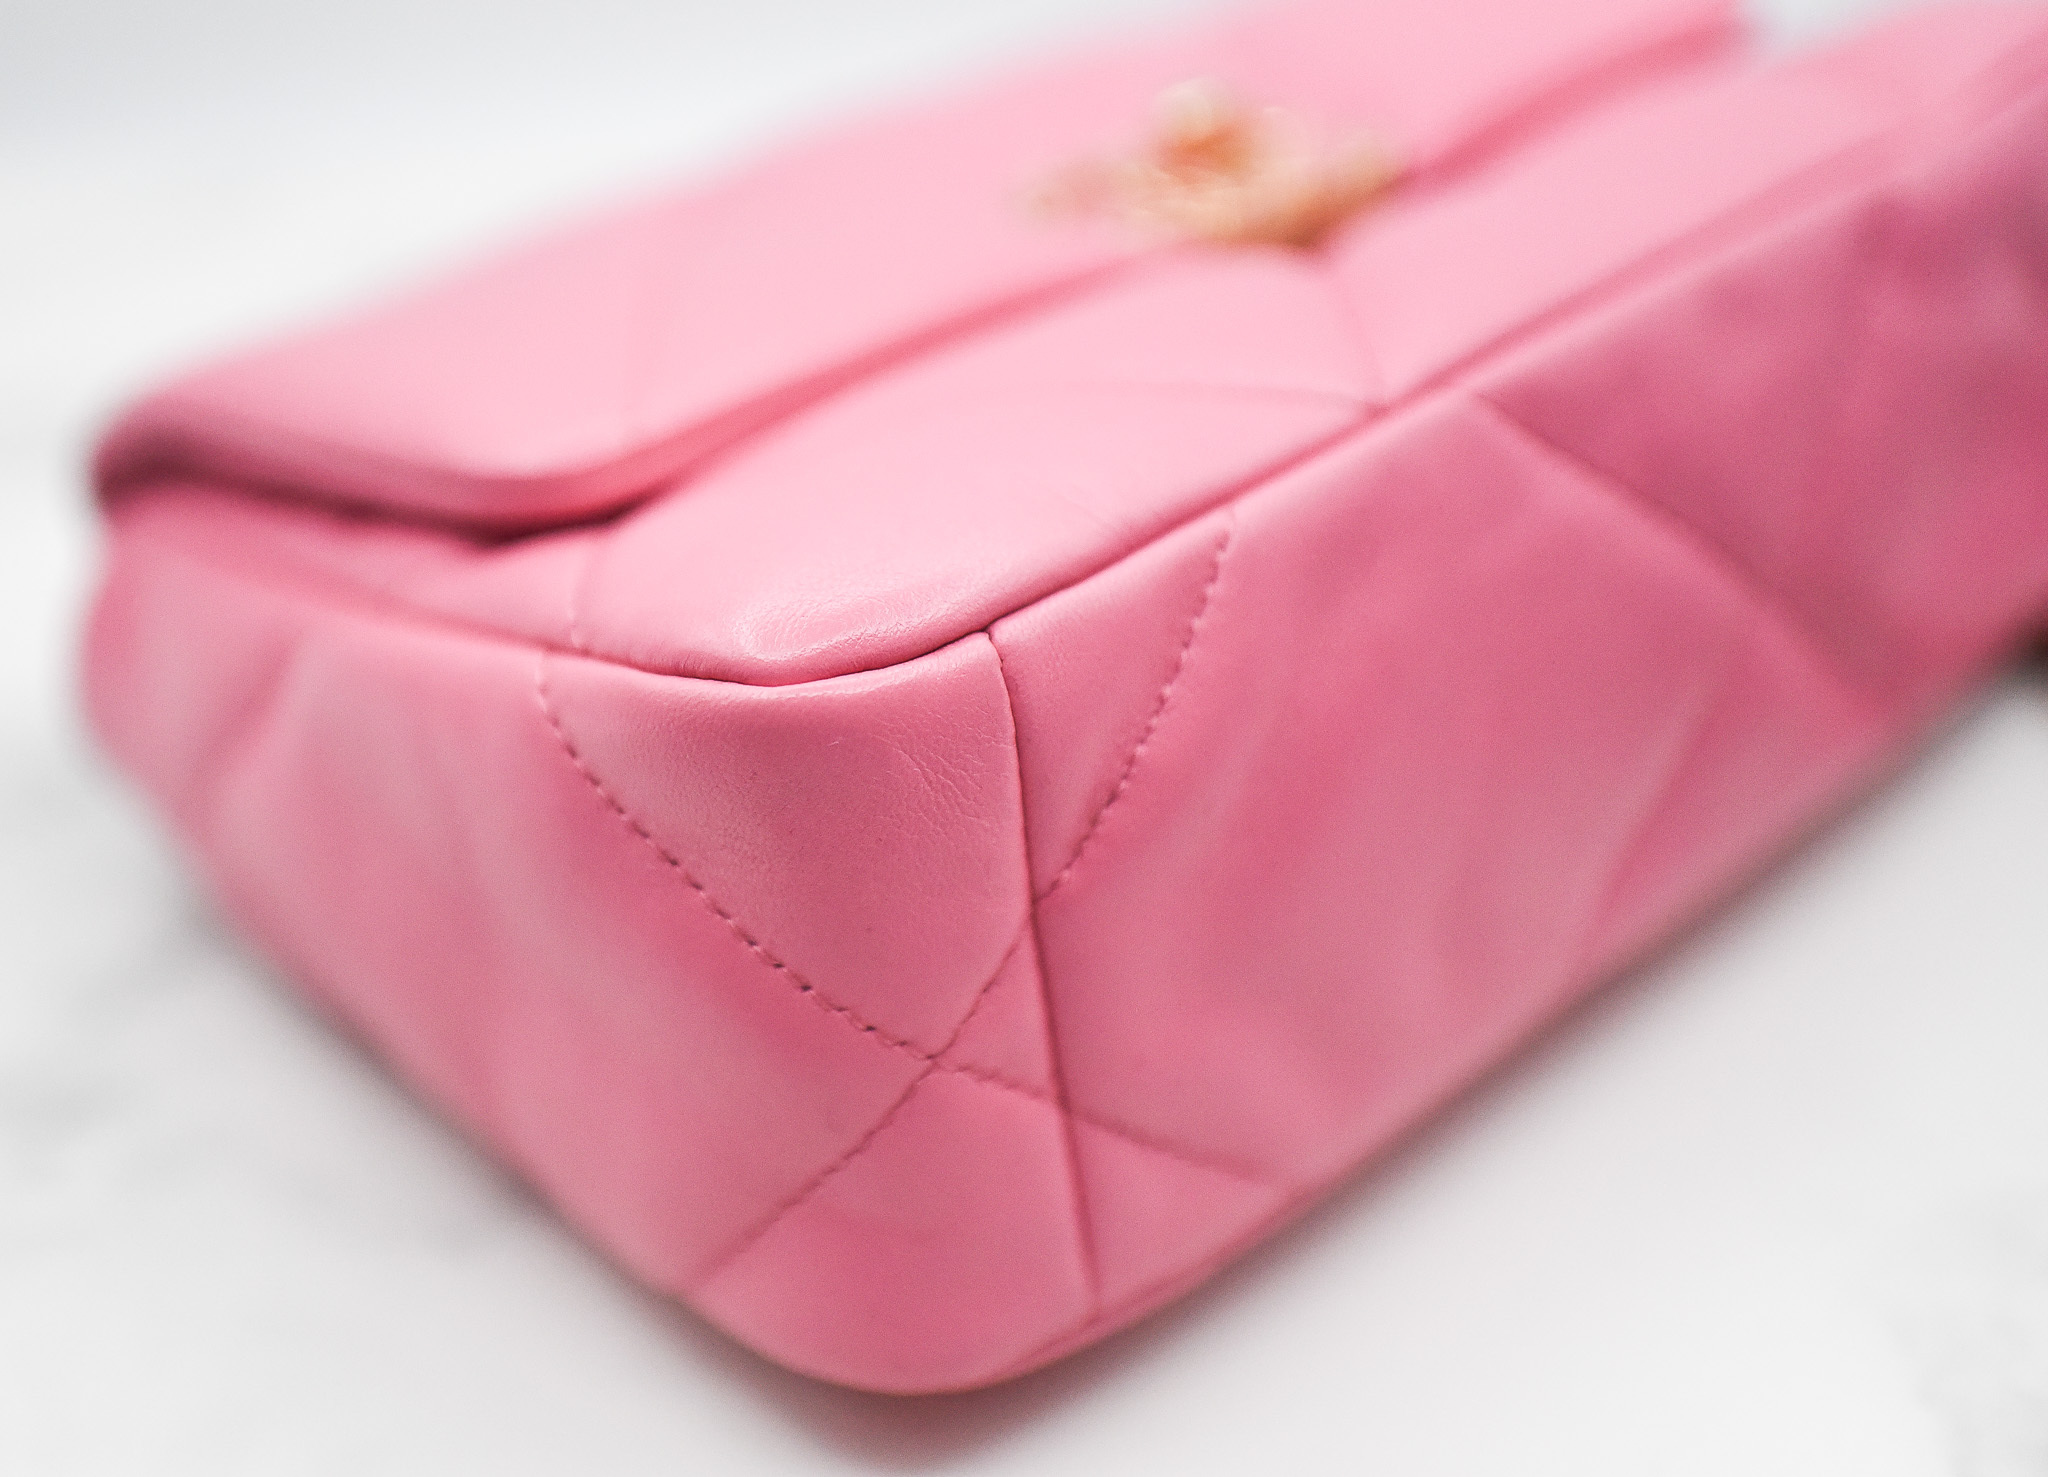 Buying My First Chanel Bag: Covid-19 Edition - The Pink Patola